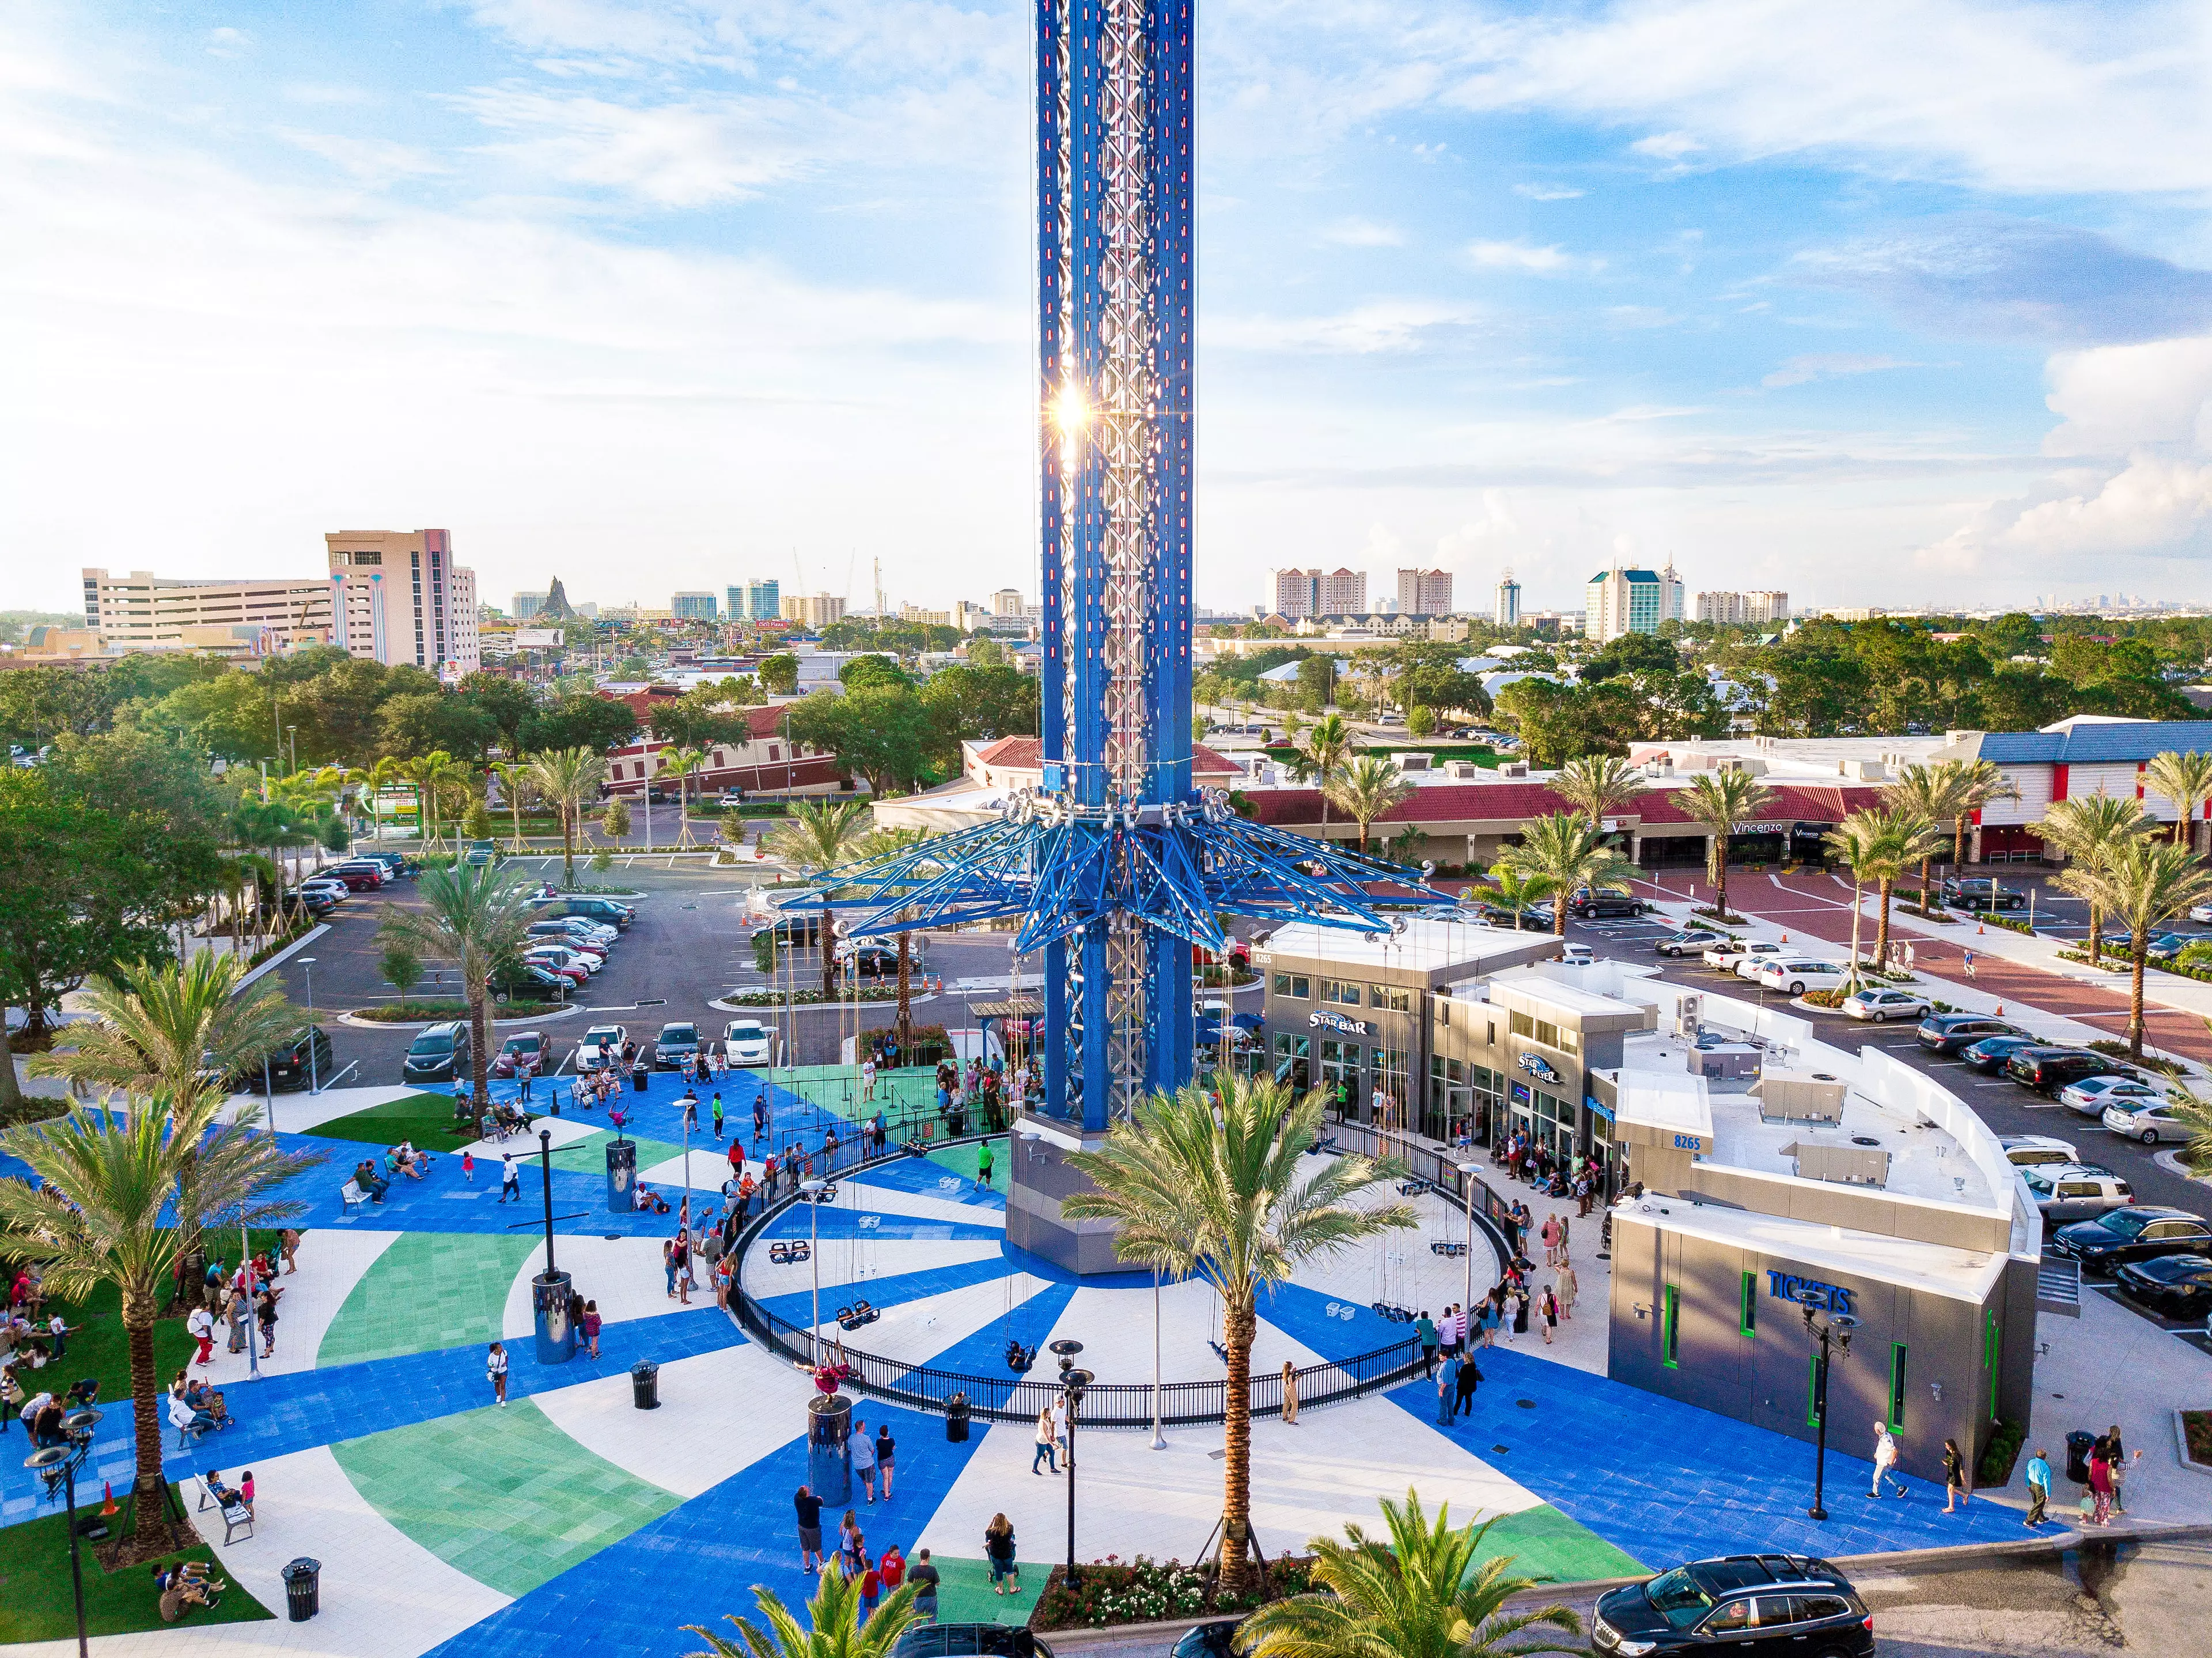 StarFlyer has been dubbed 'the world's tallest swing ride'.